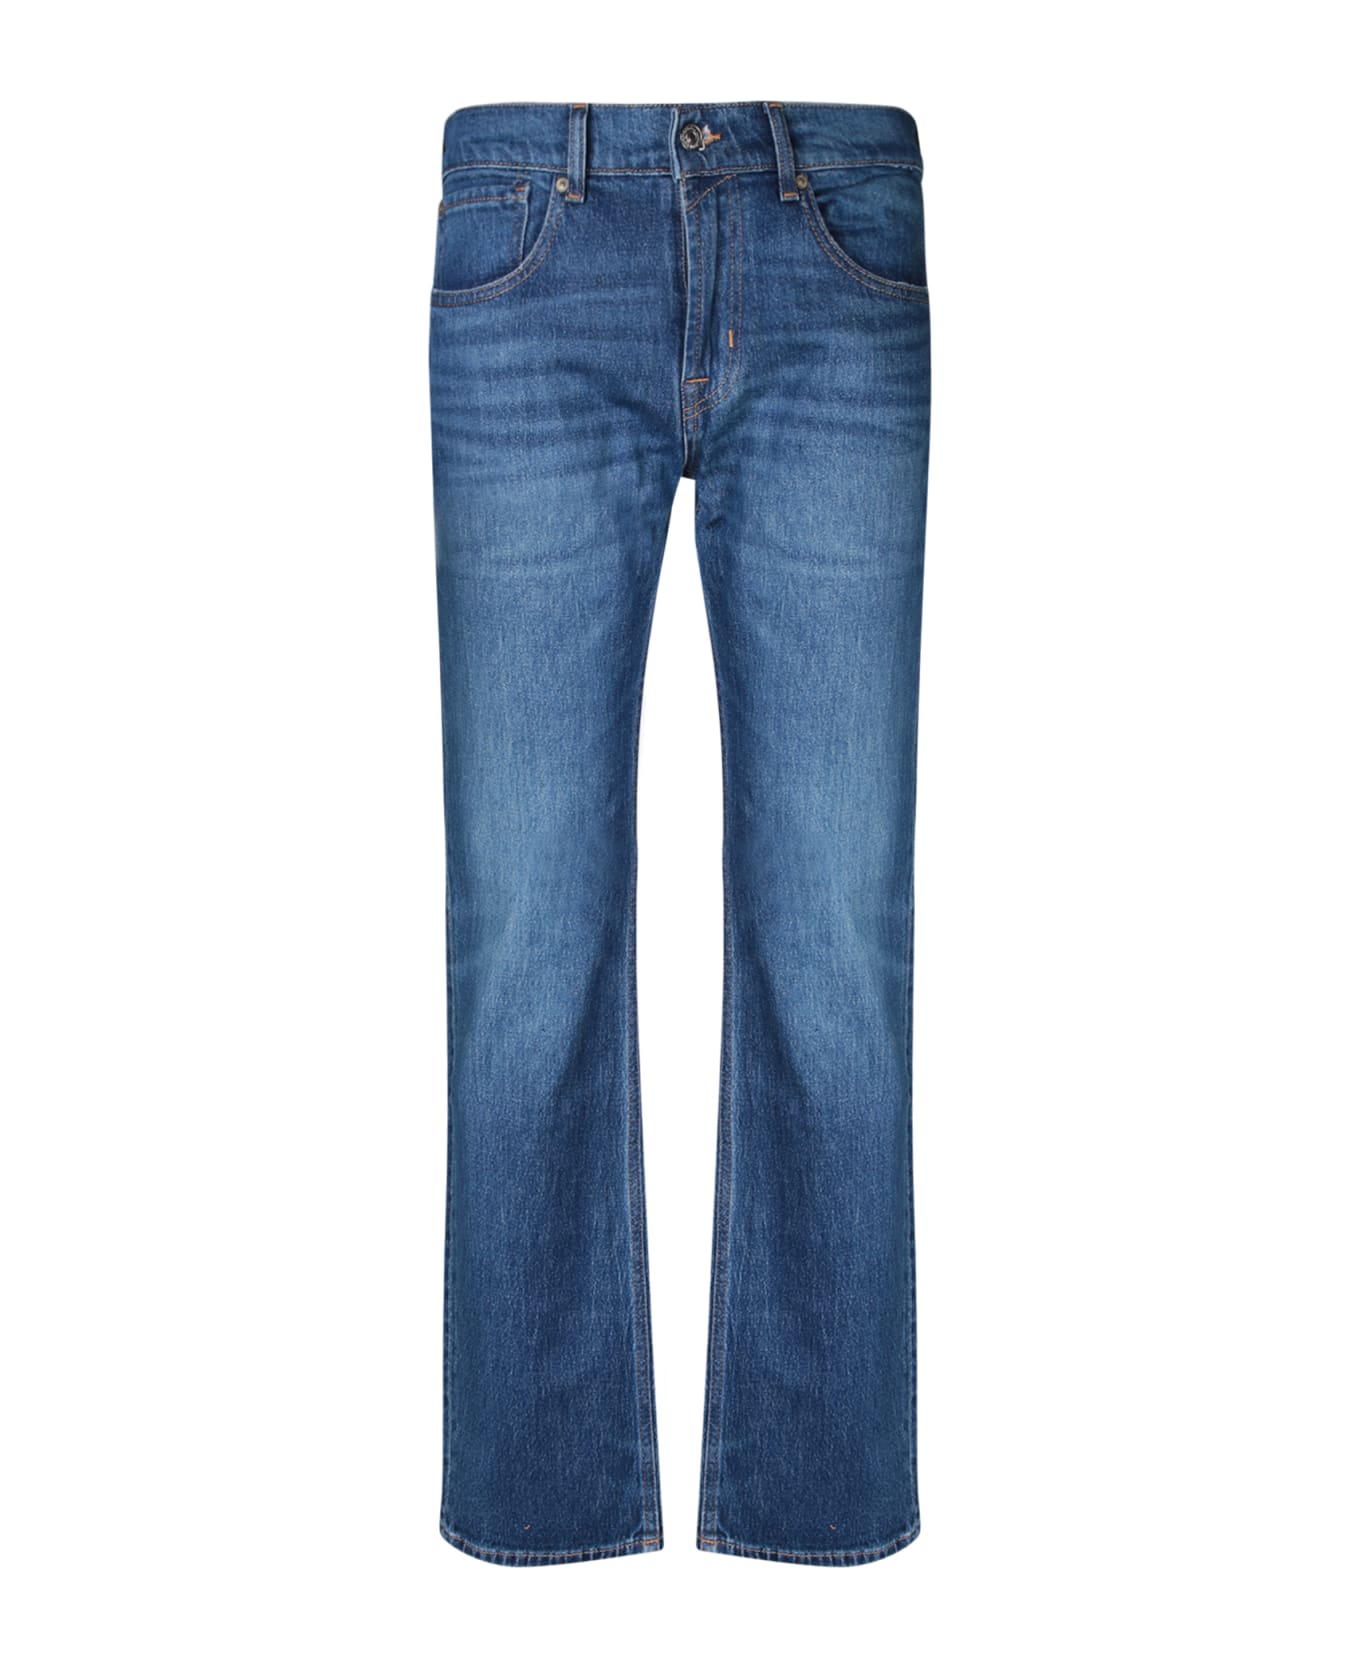 7 For All Mankind The Straight Exchange Blue Jeans - Blue